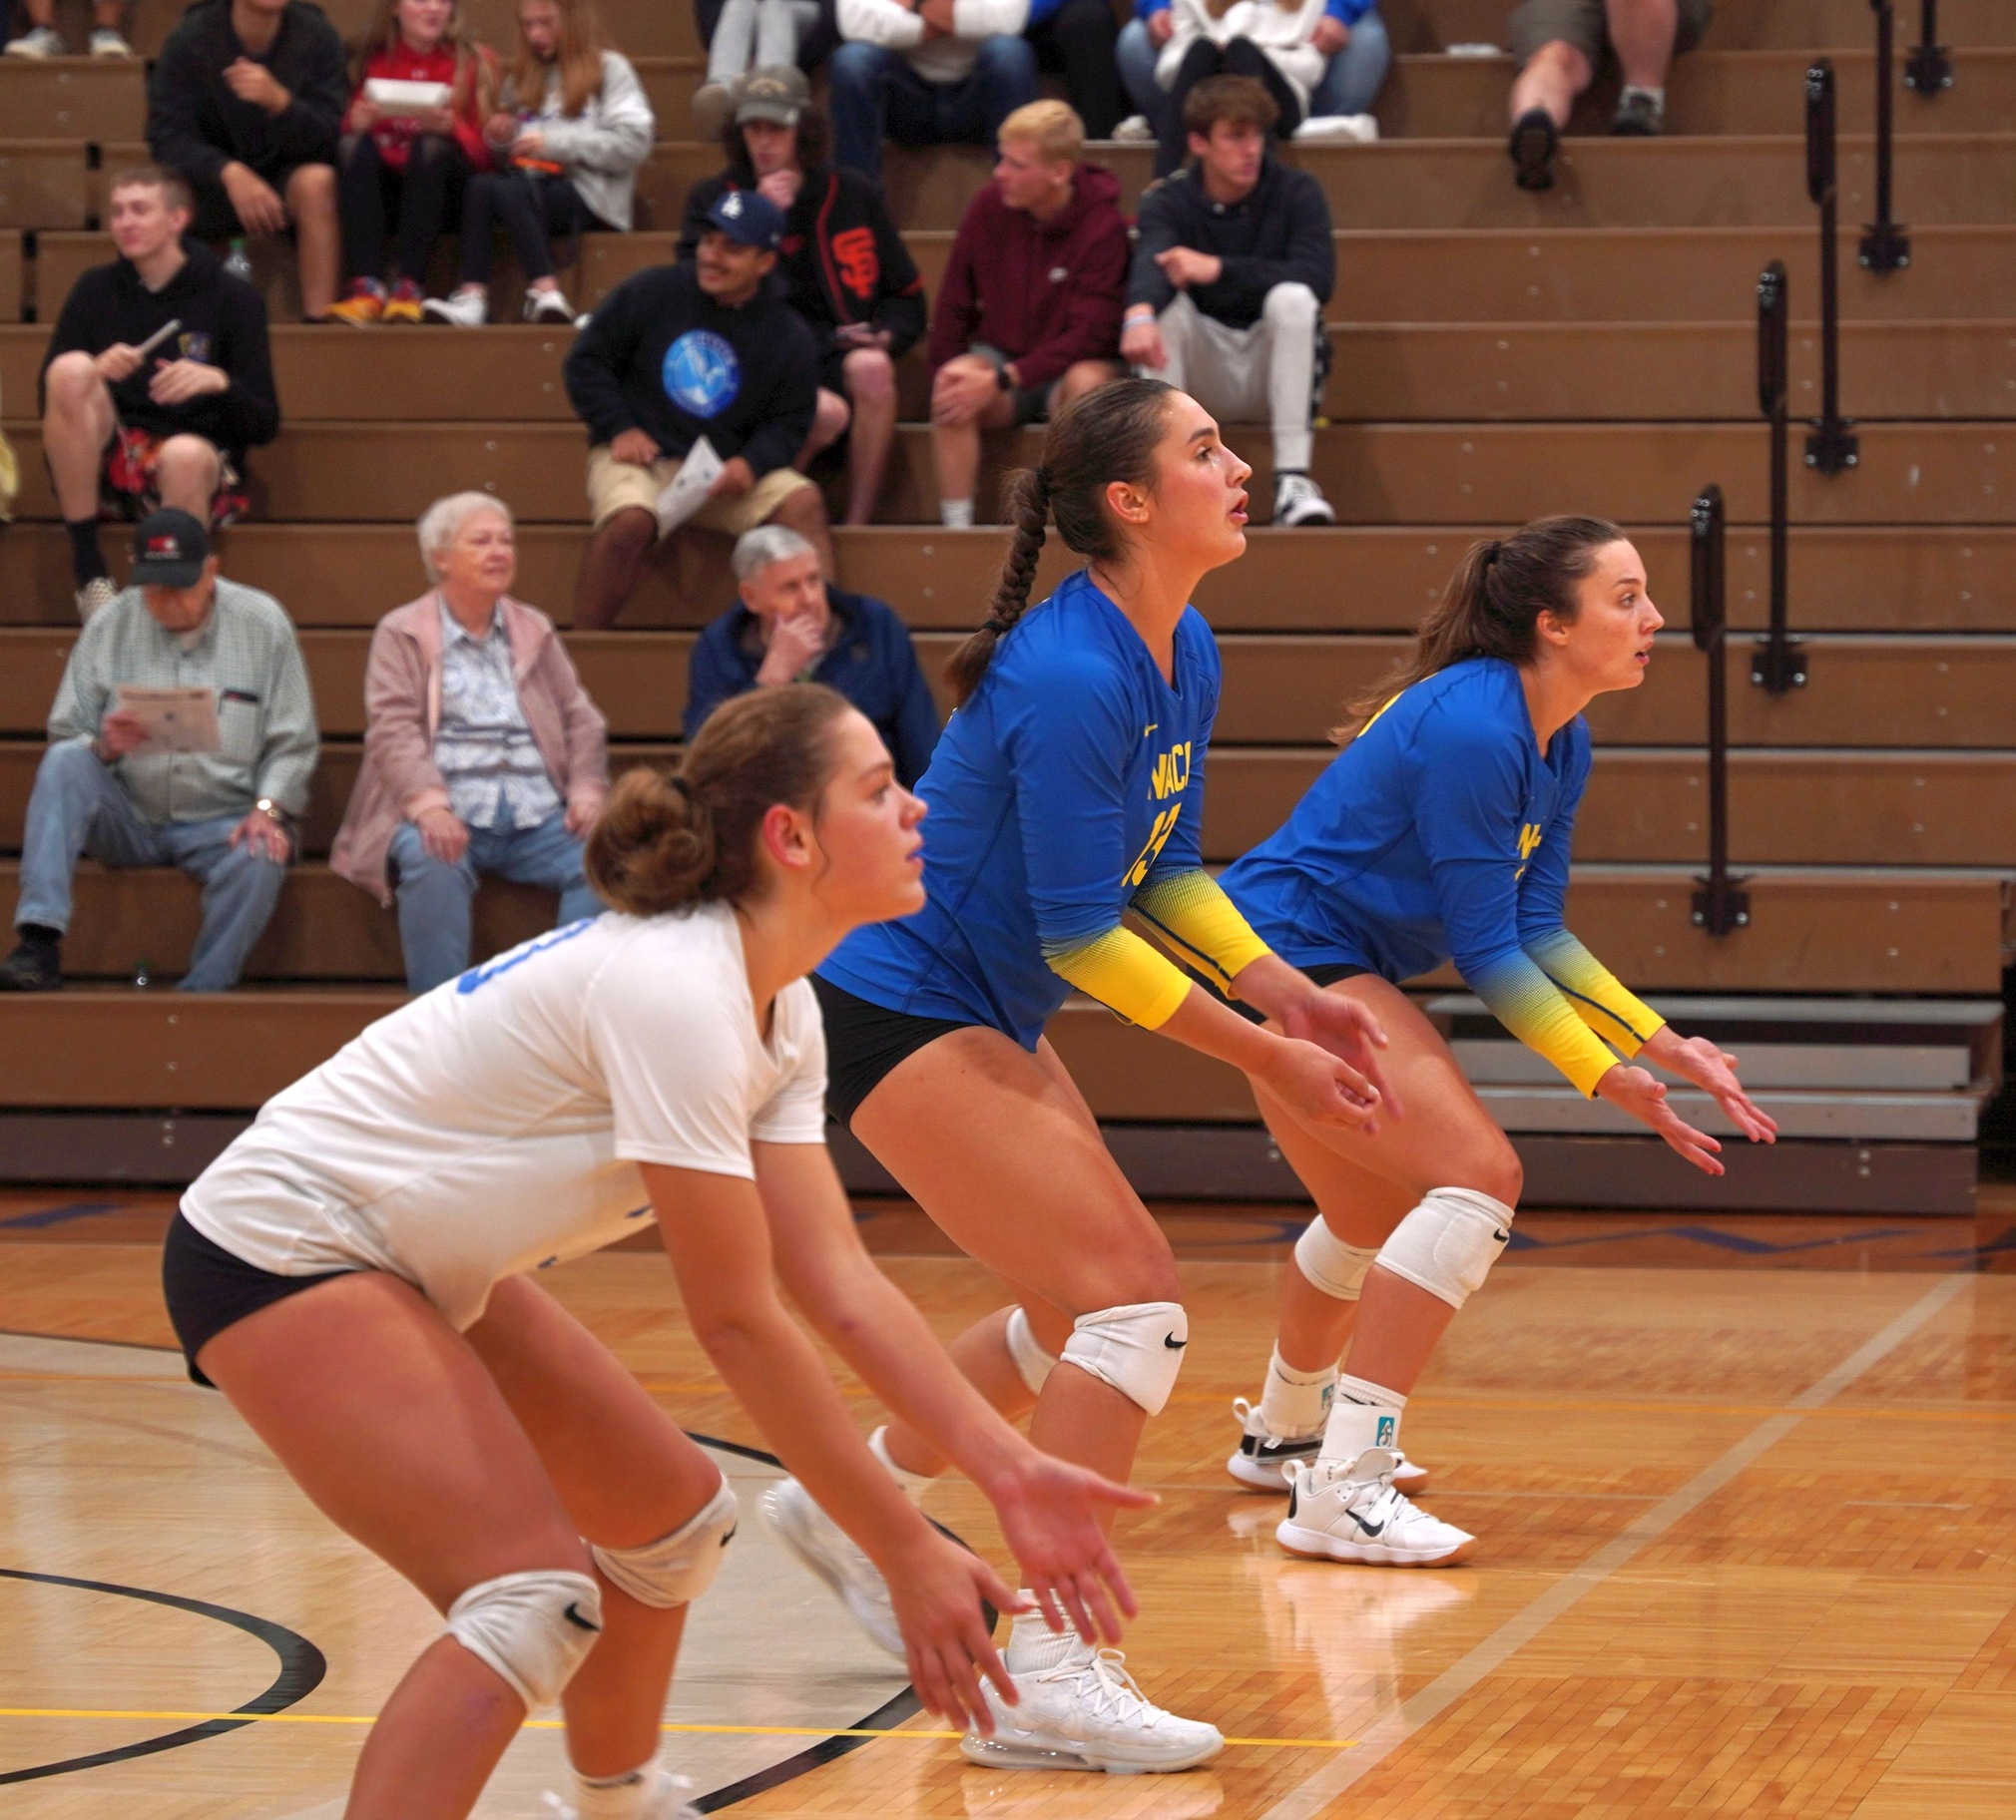 The NIACC back row gets ready for the serve in Friday's home match against the Wartburg College Junior Varsity. Photo by Kaitlyn Davis.